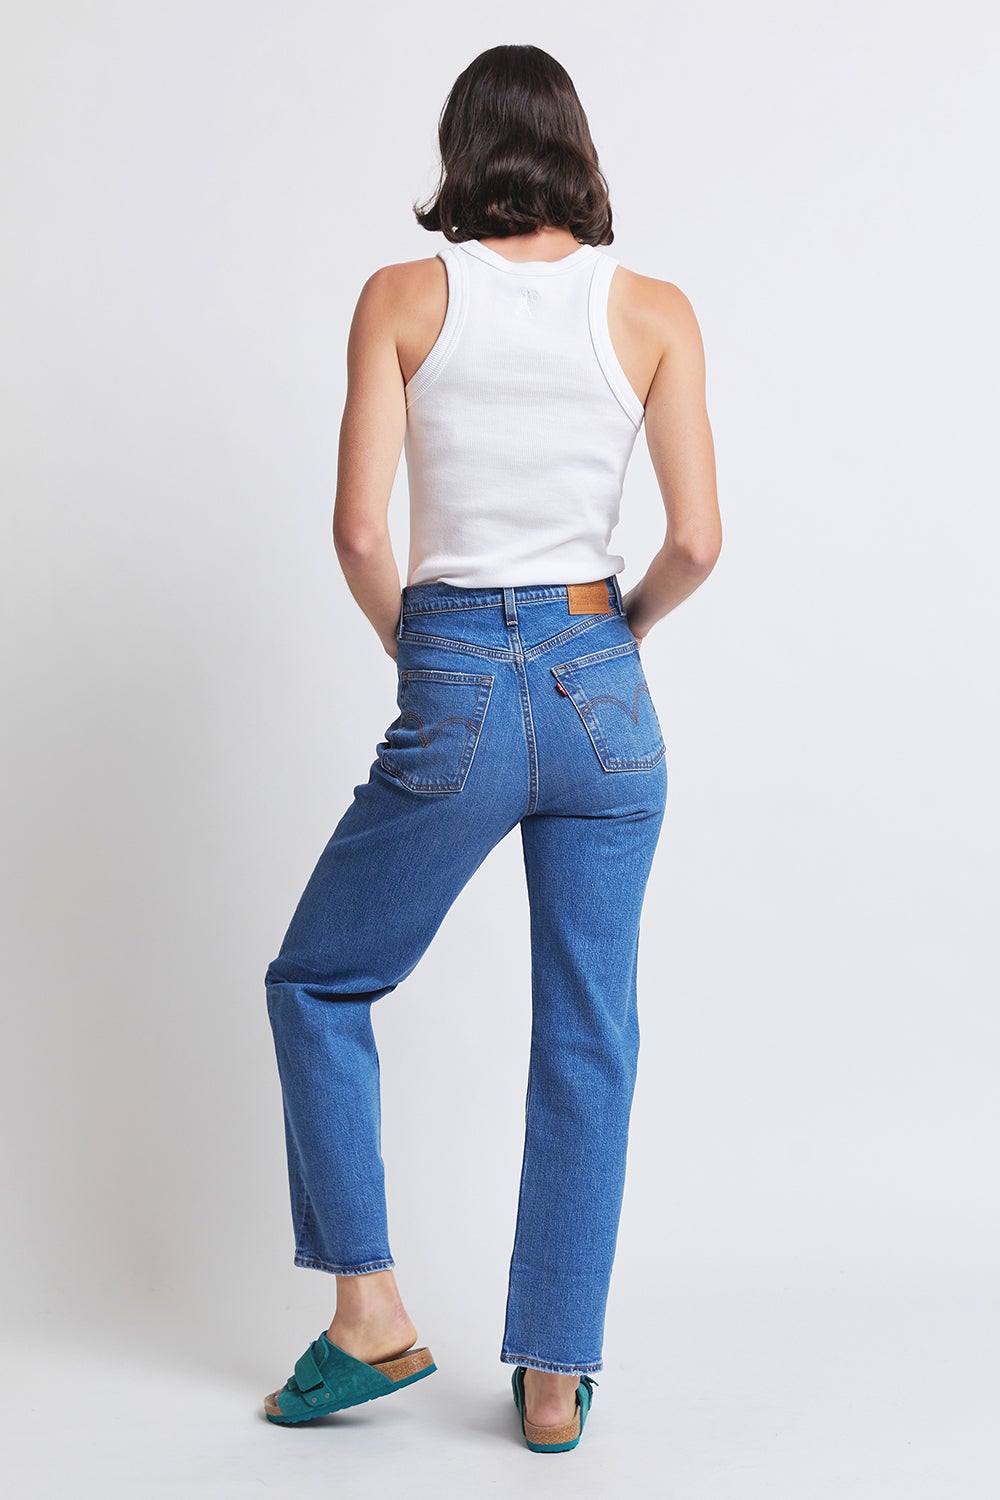 Levi's Ribcage Straight Ankle Jeans Jazz Jive Together